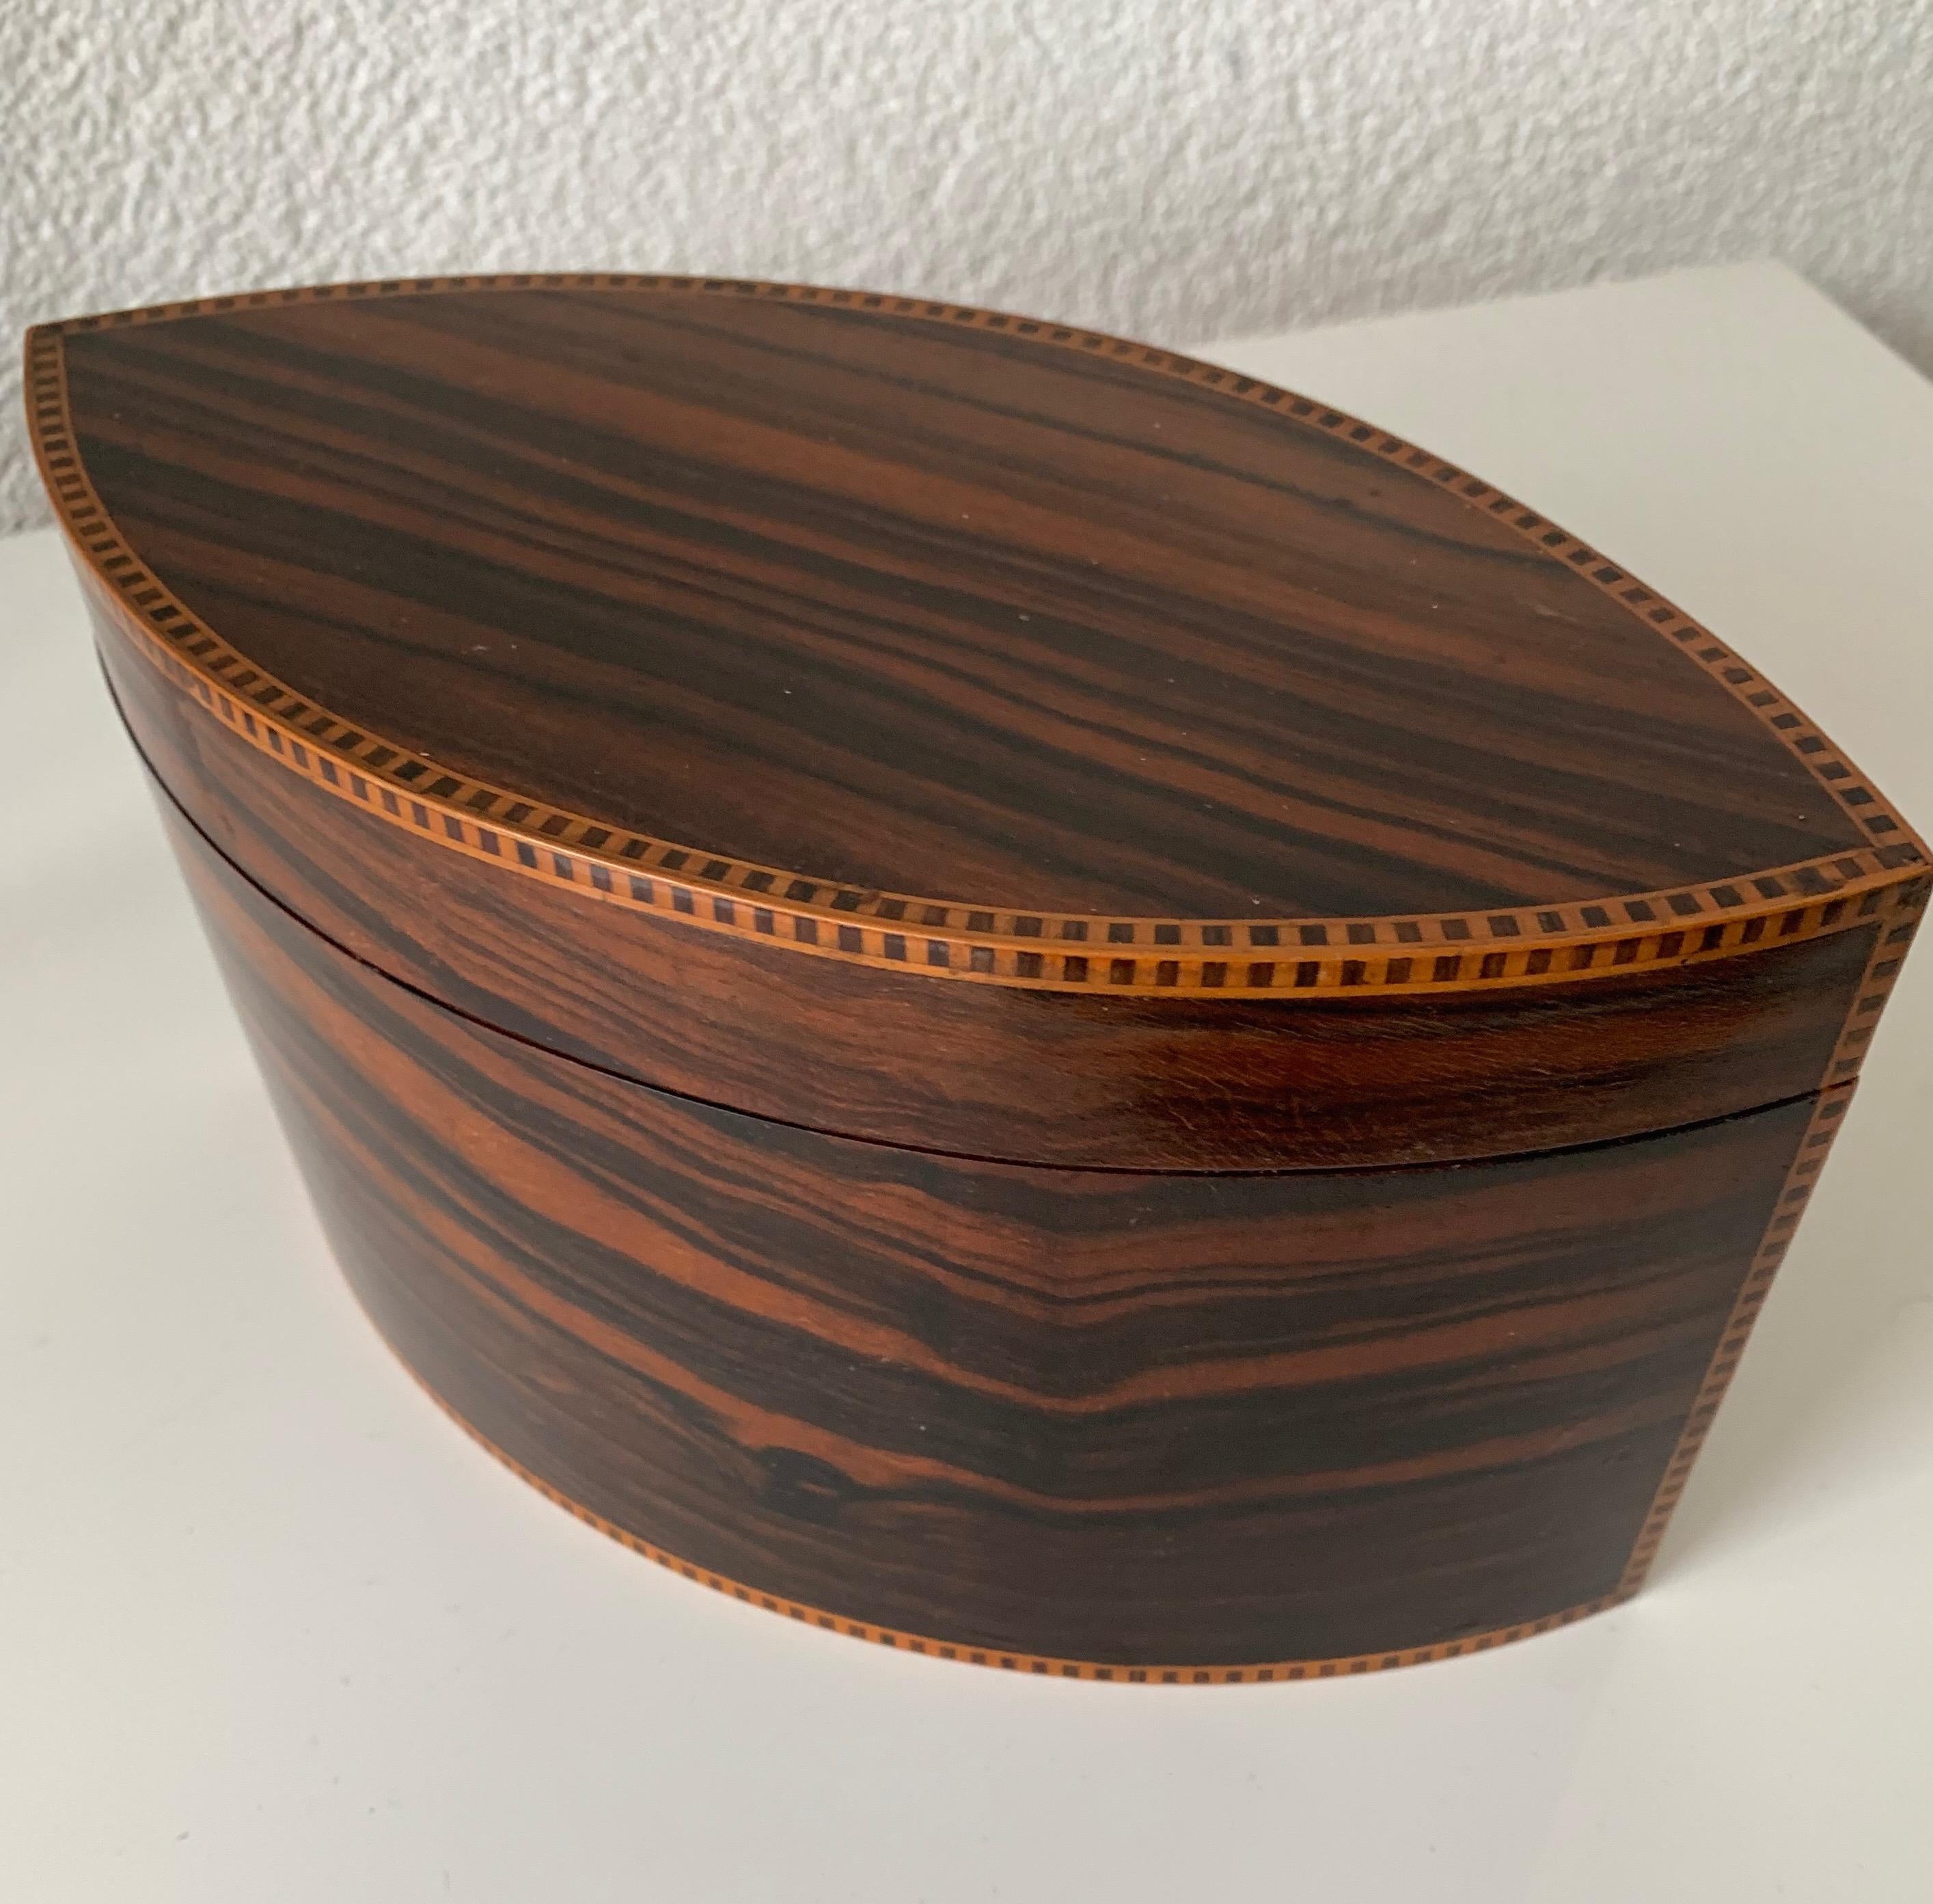 Hand-Crafted Top Quality and Stunning Shape Art Deco Nutwood, Hardwood and Satinwood Box, 